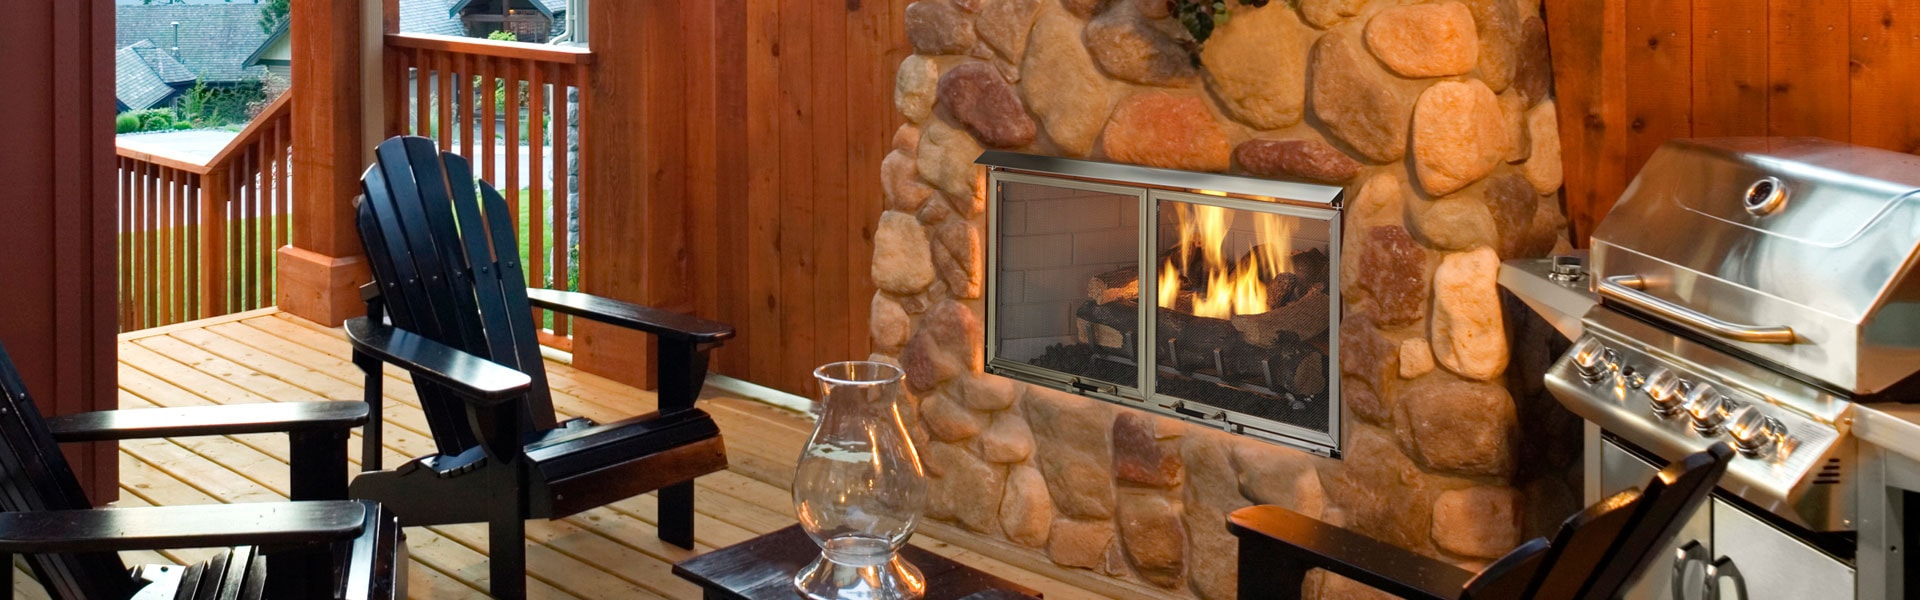 How to Install Gas Fireplace In Existing Chimney Awesome Outdoor Lifestyles Villa Gas Fireplace